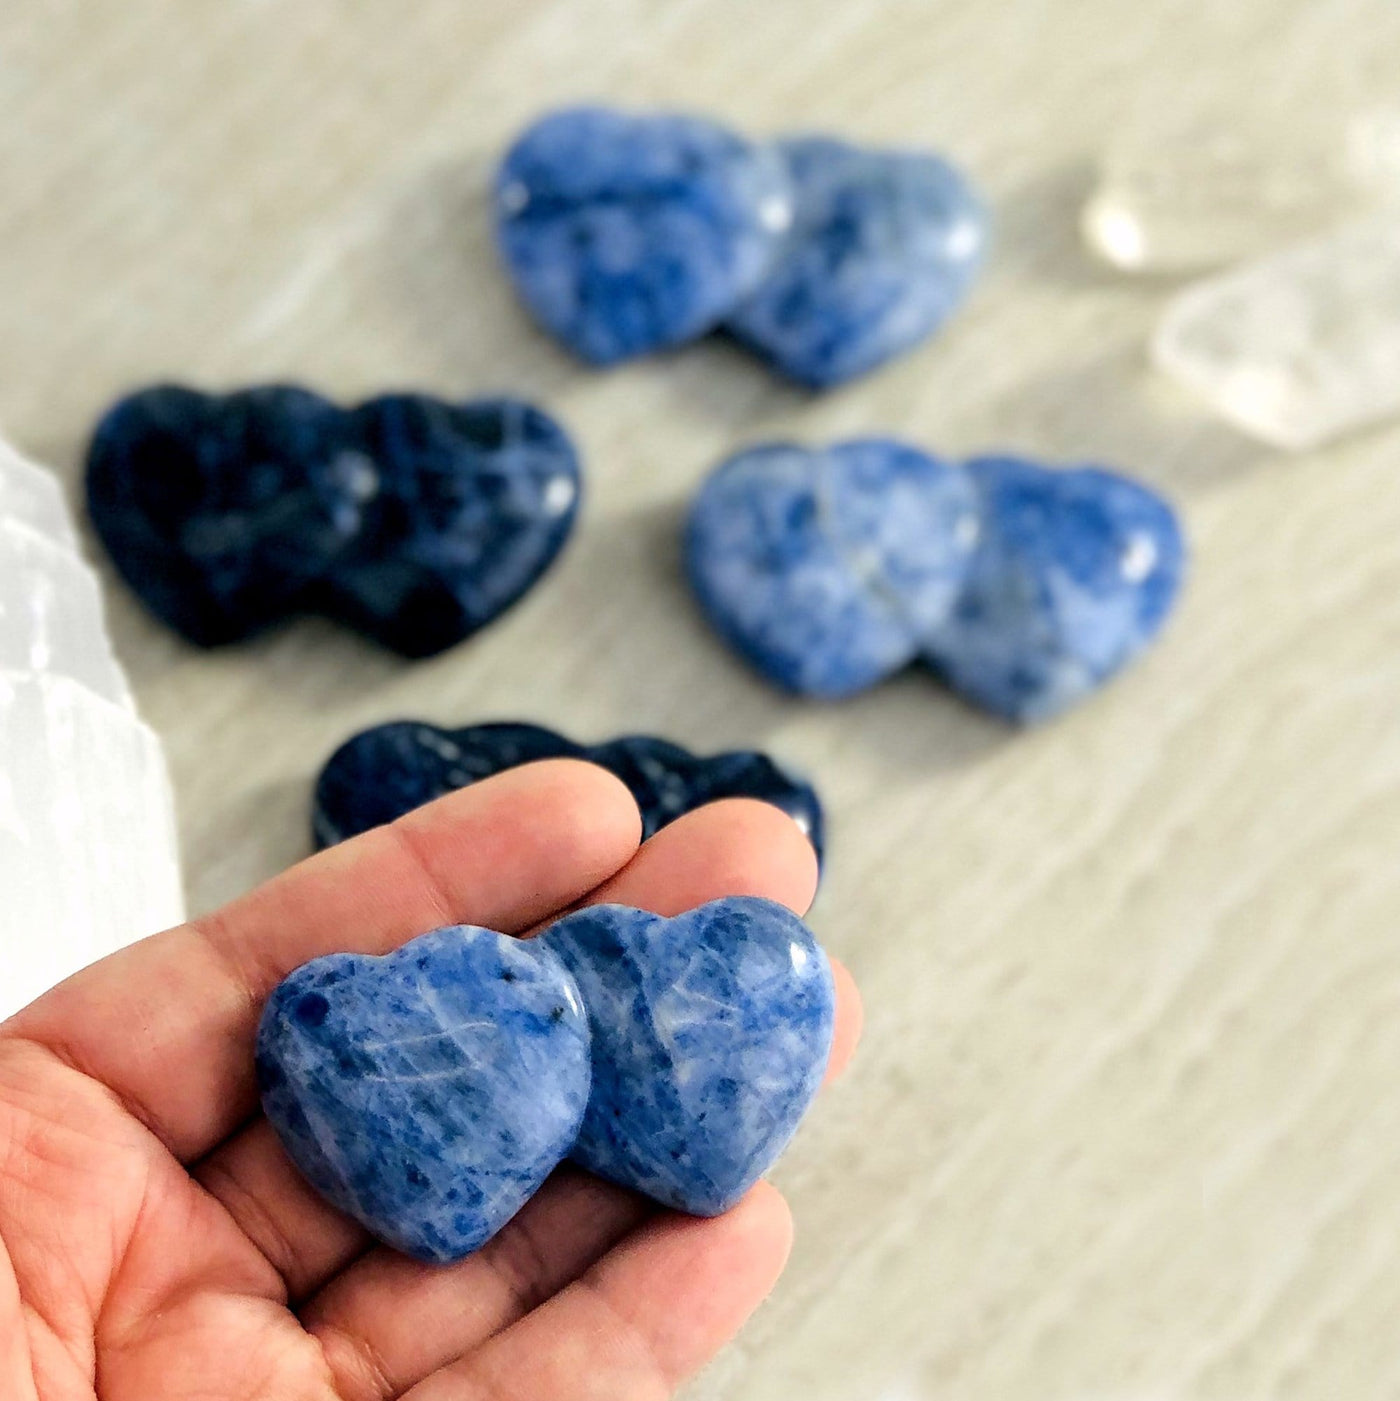 one sodalite double heart shaped stone in hand for size reference with four others in background